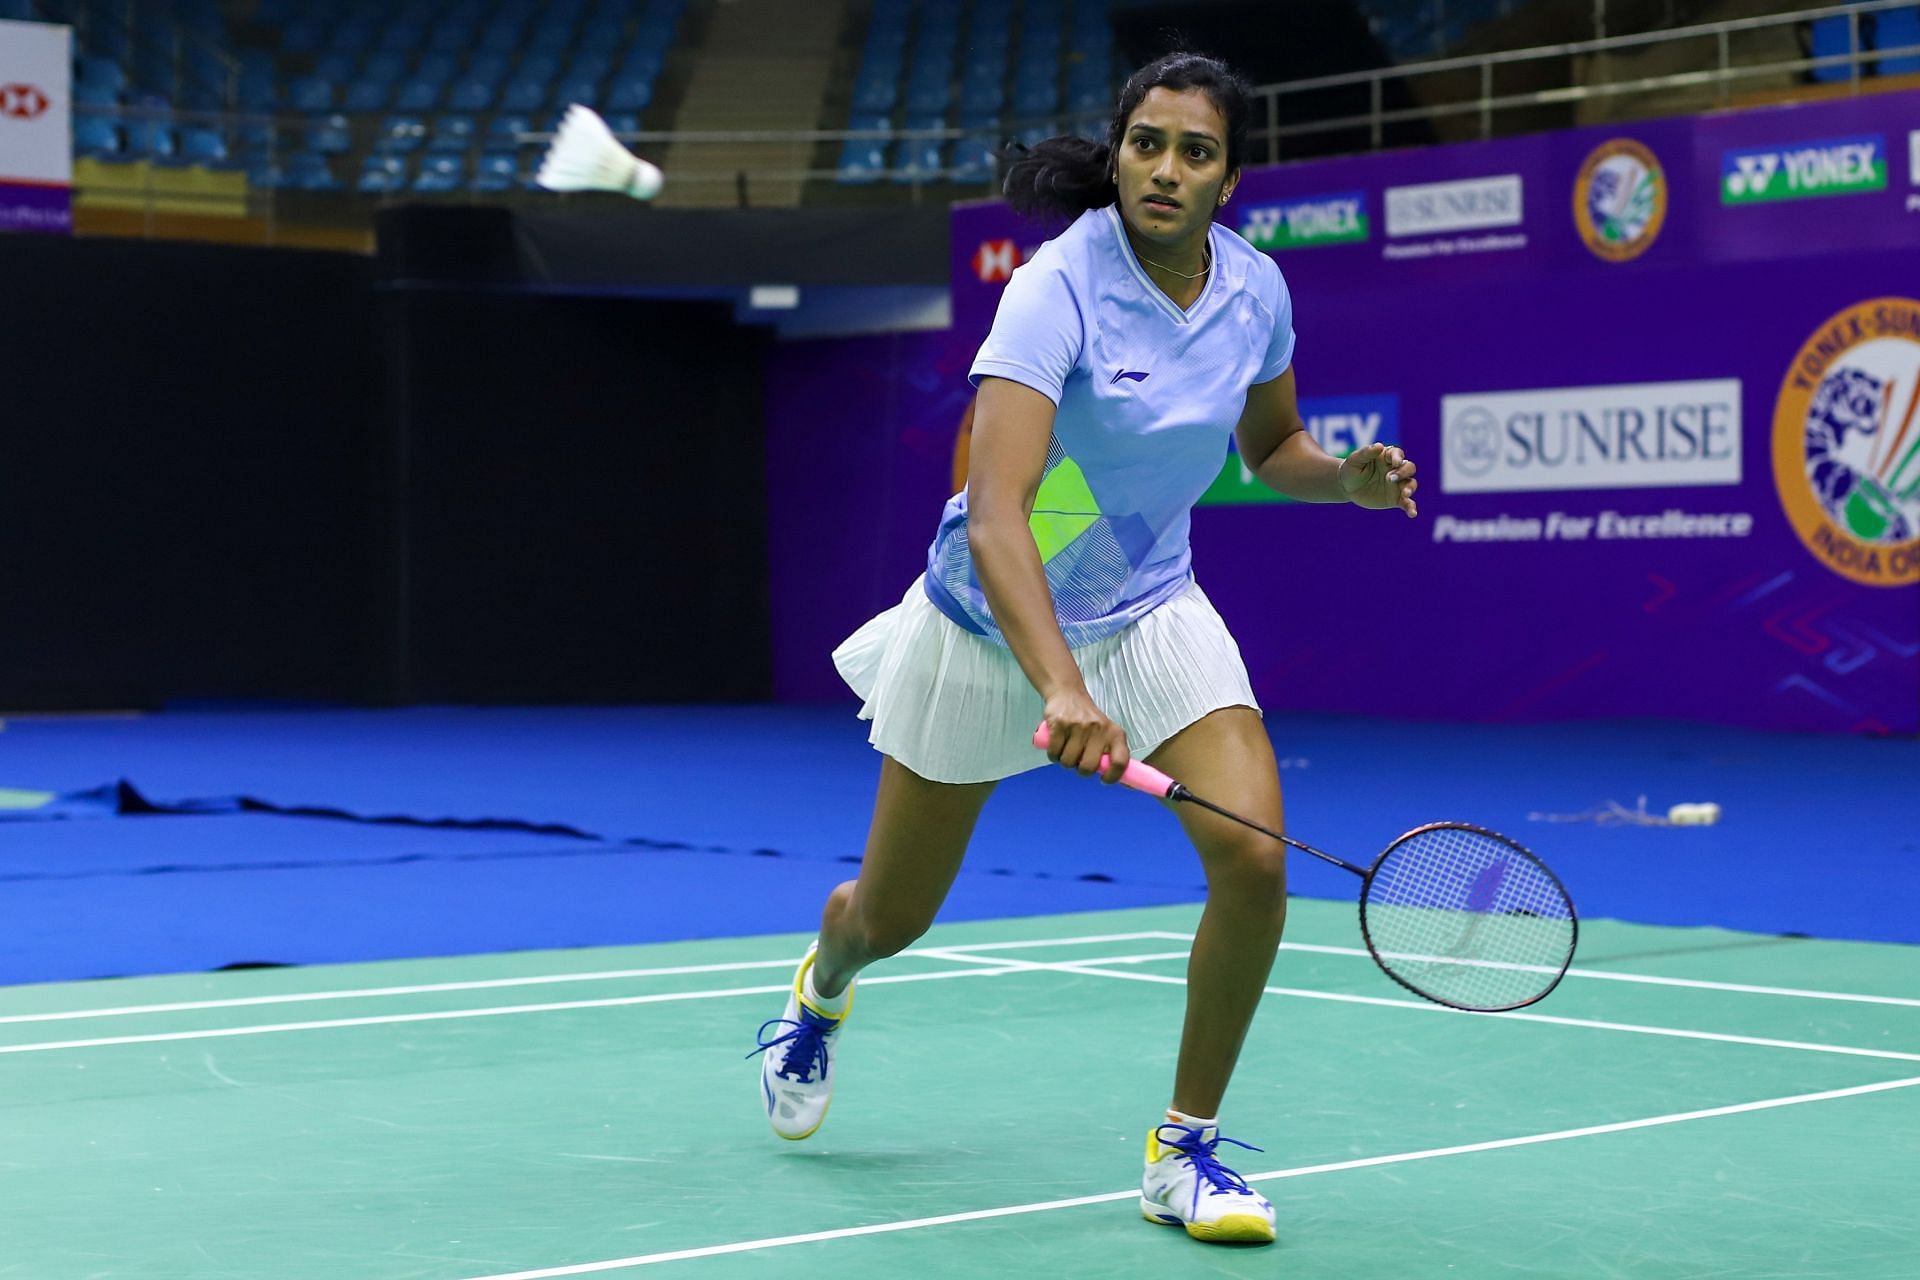 PV Sindhu beat Mahoor Shahzad of Pakistan 21-7, 21-6 as India completed an easy 5-0 victory in their opening Group A league match in Commonwealth Games on Saturday. (Pic credit: BAI)